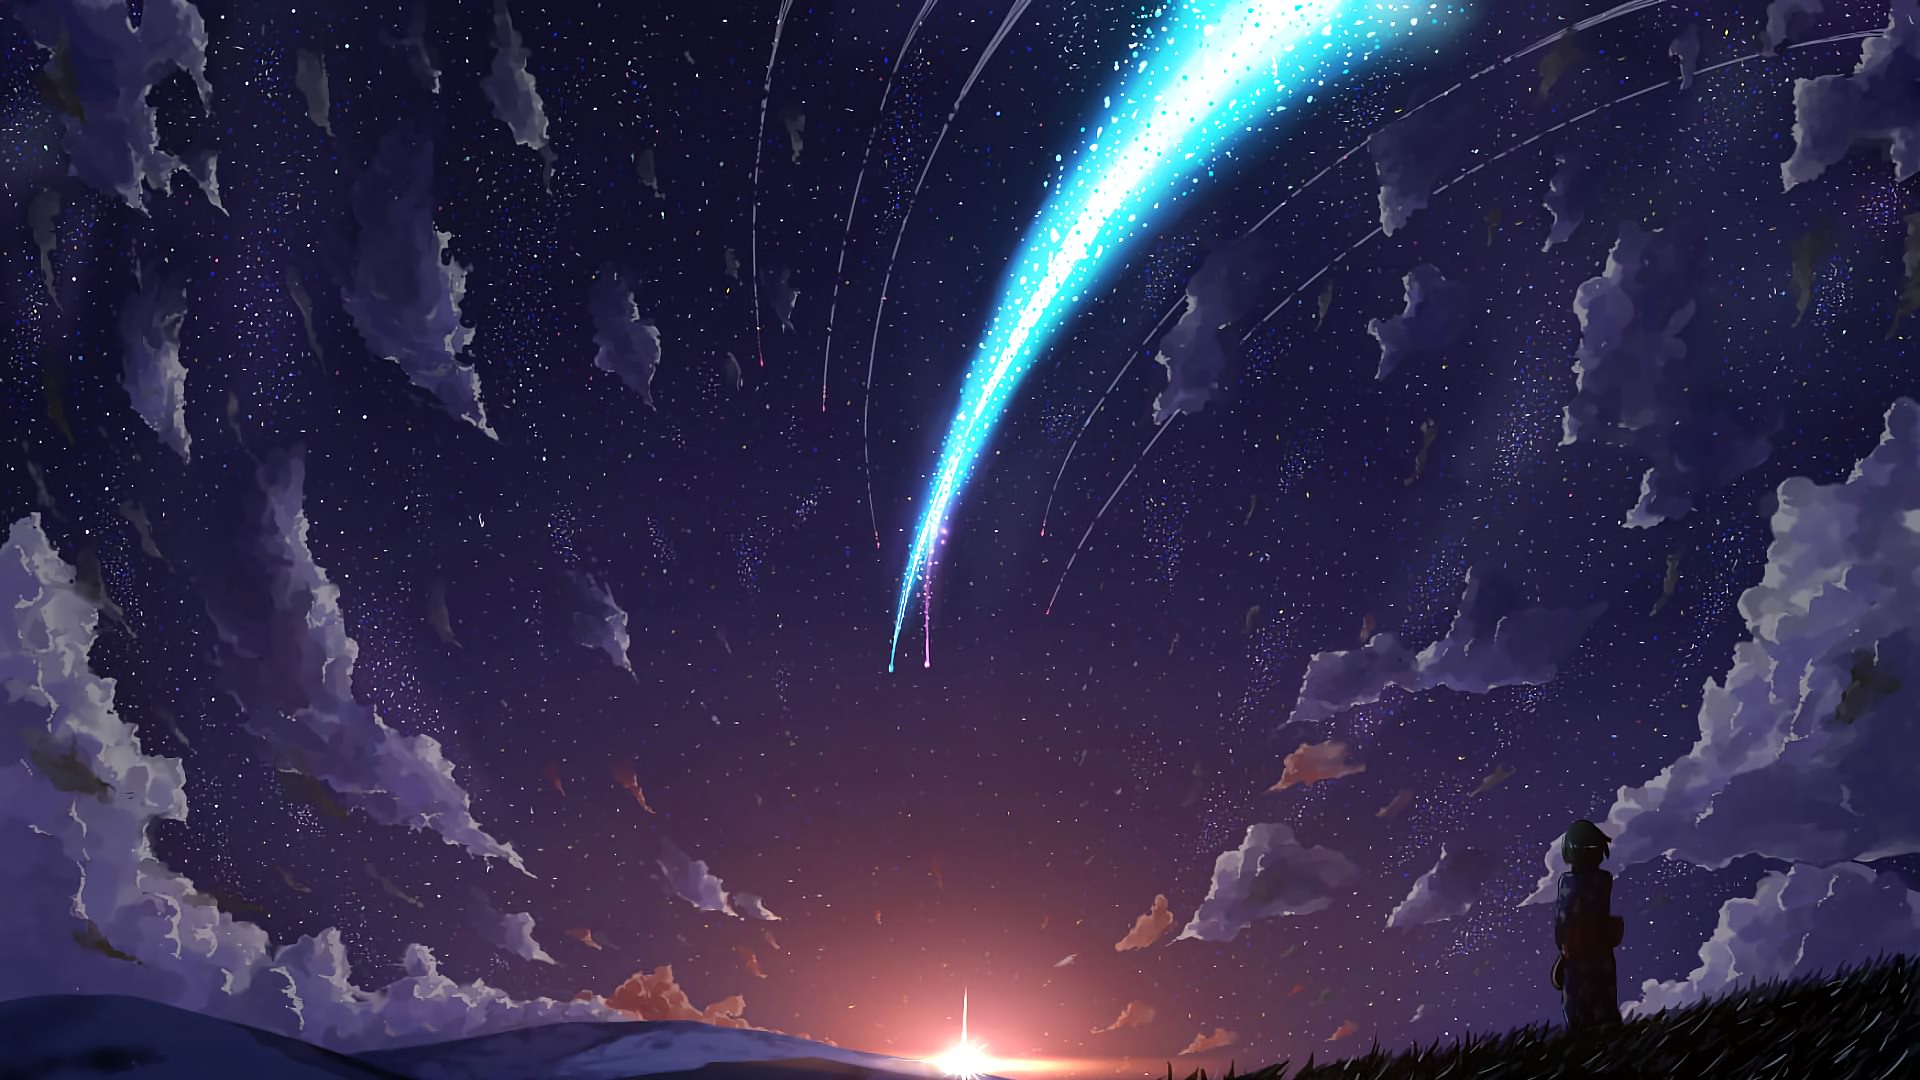 Your Name Anime Landscape Wallpapers   Top Free Your Name Anime